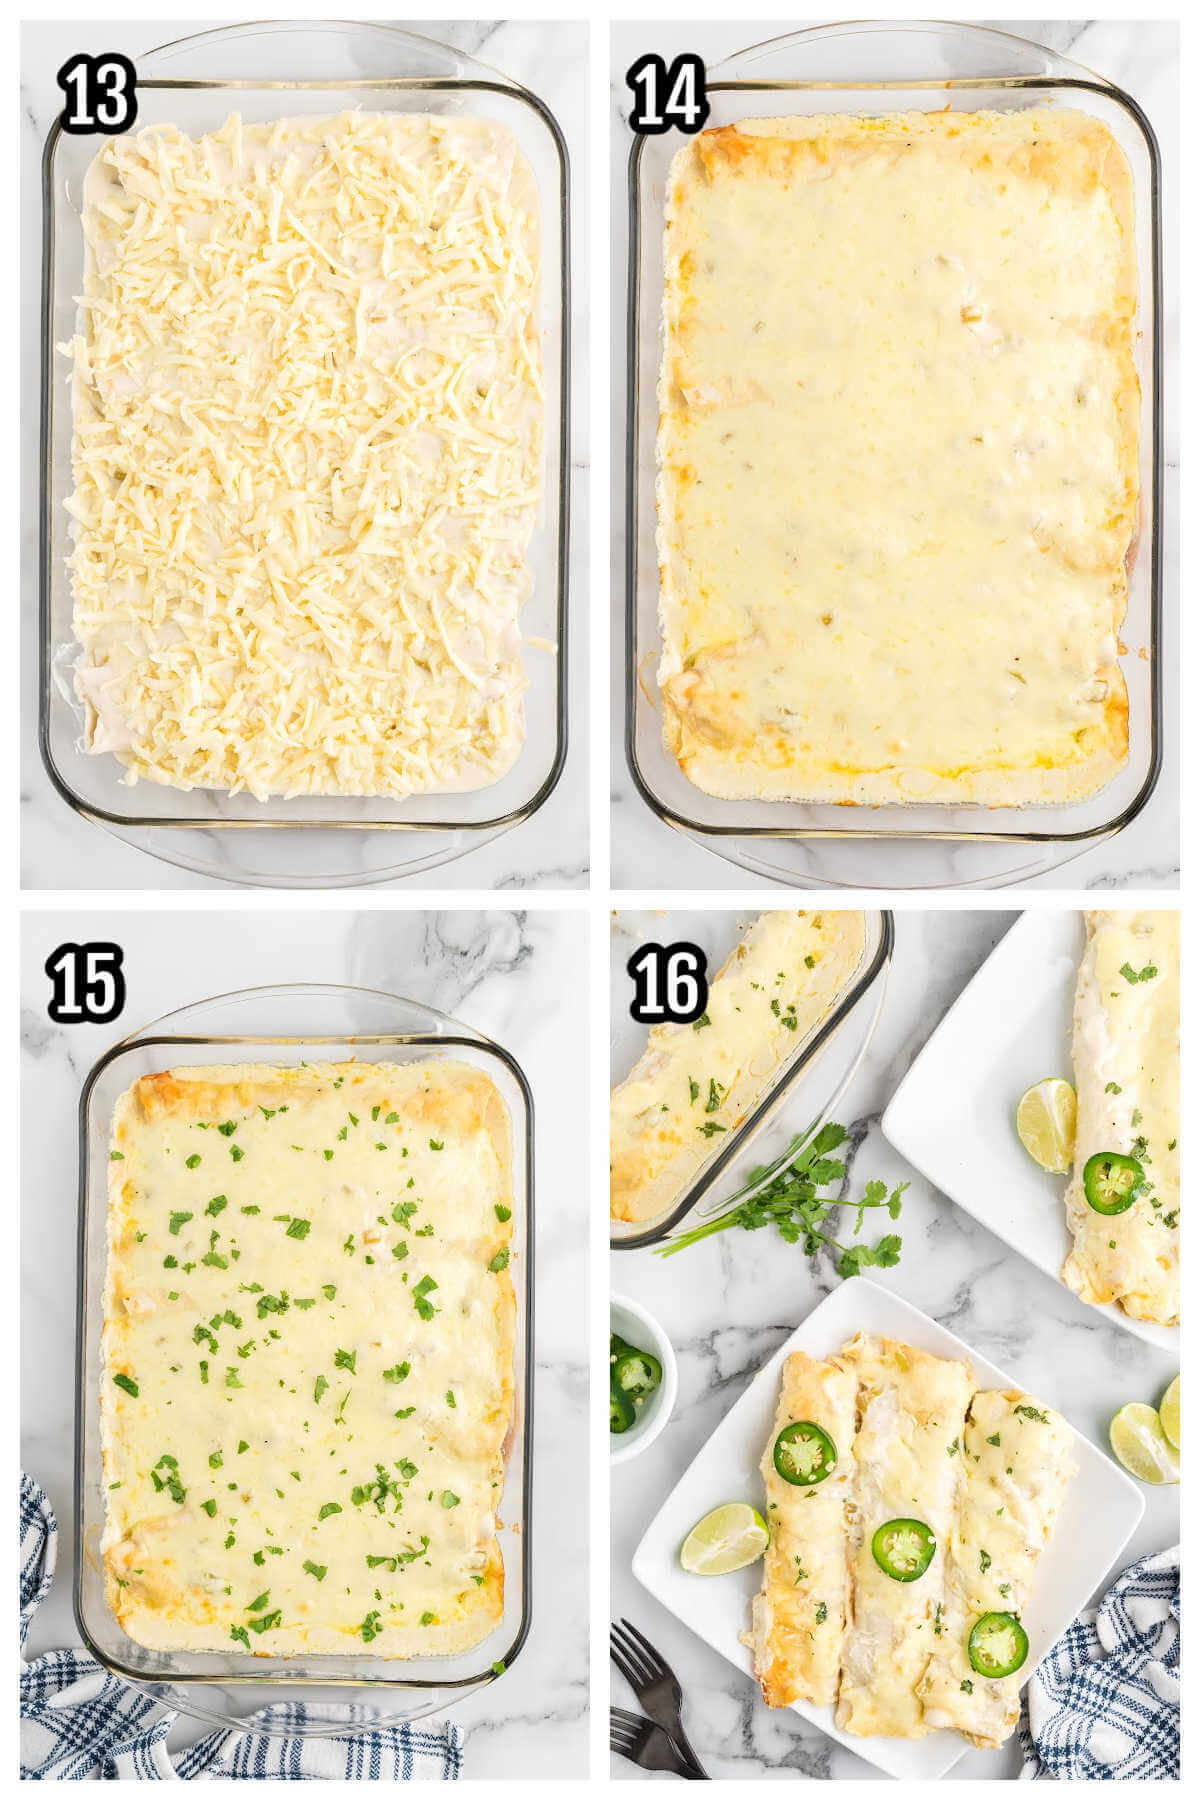 4th and final collage of the steps to cooking the shrimp enchiladas and plating them.